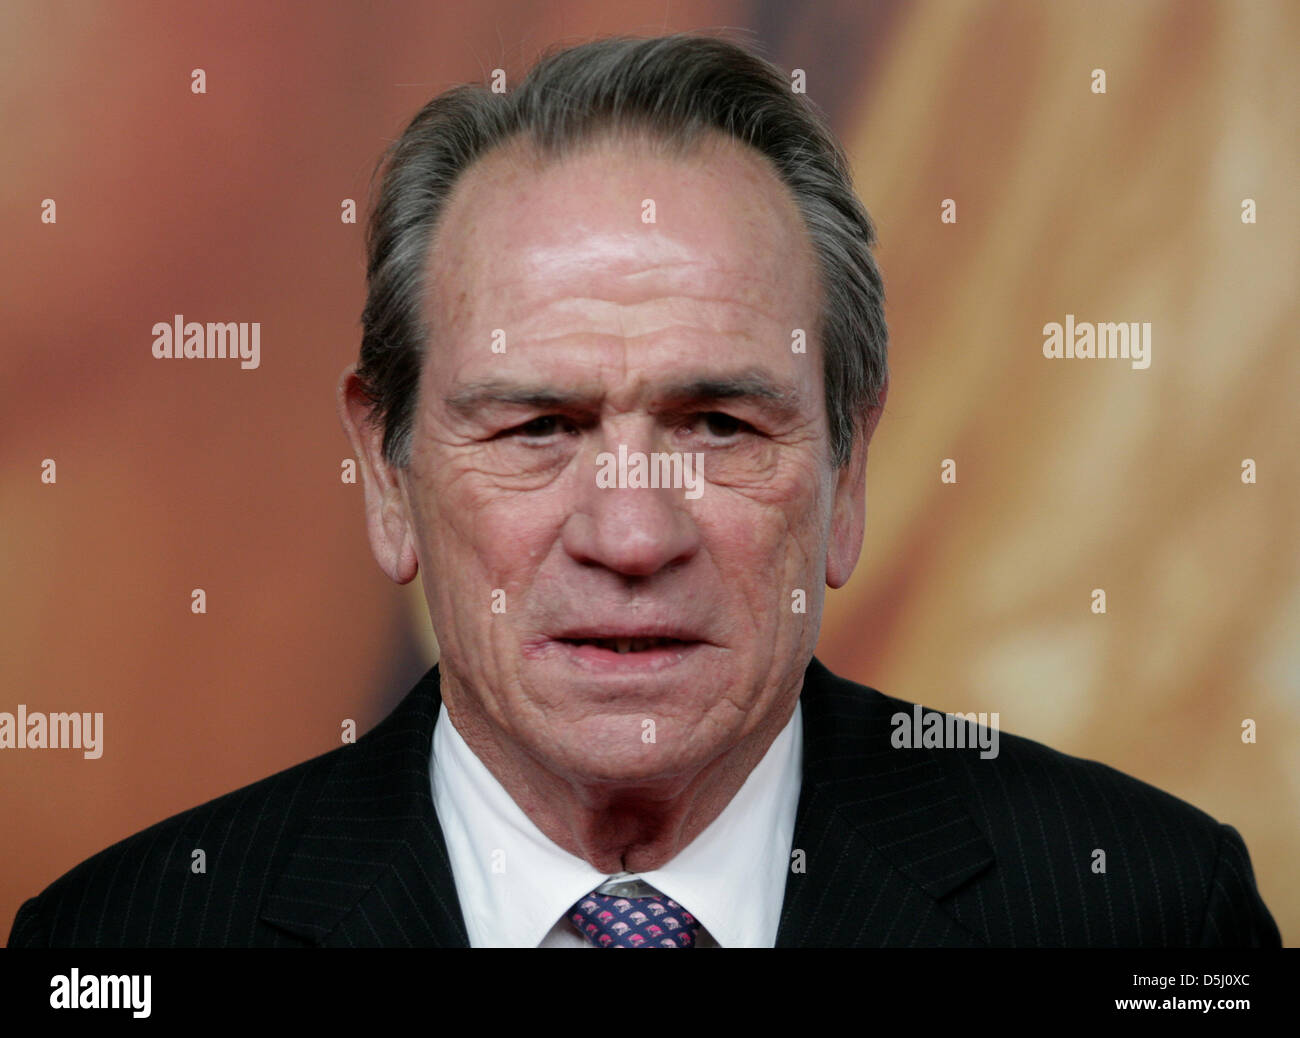 Actor and Academy Award winner Tommy Lee Jones poses for the camera at the premiere of the film 'Hope Springs' in Berlin, Germany, 20 September 2012. The film is presented in German cinemas on 27 September 2012. Photo: Hannibal Stock Photo